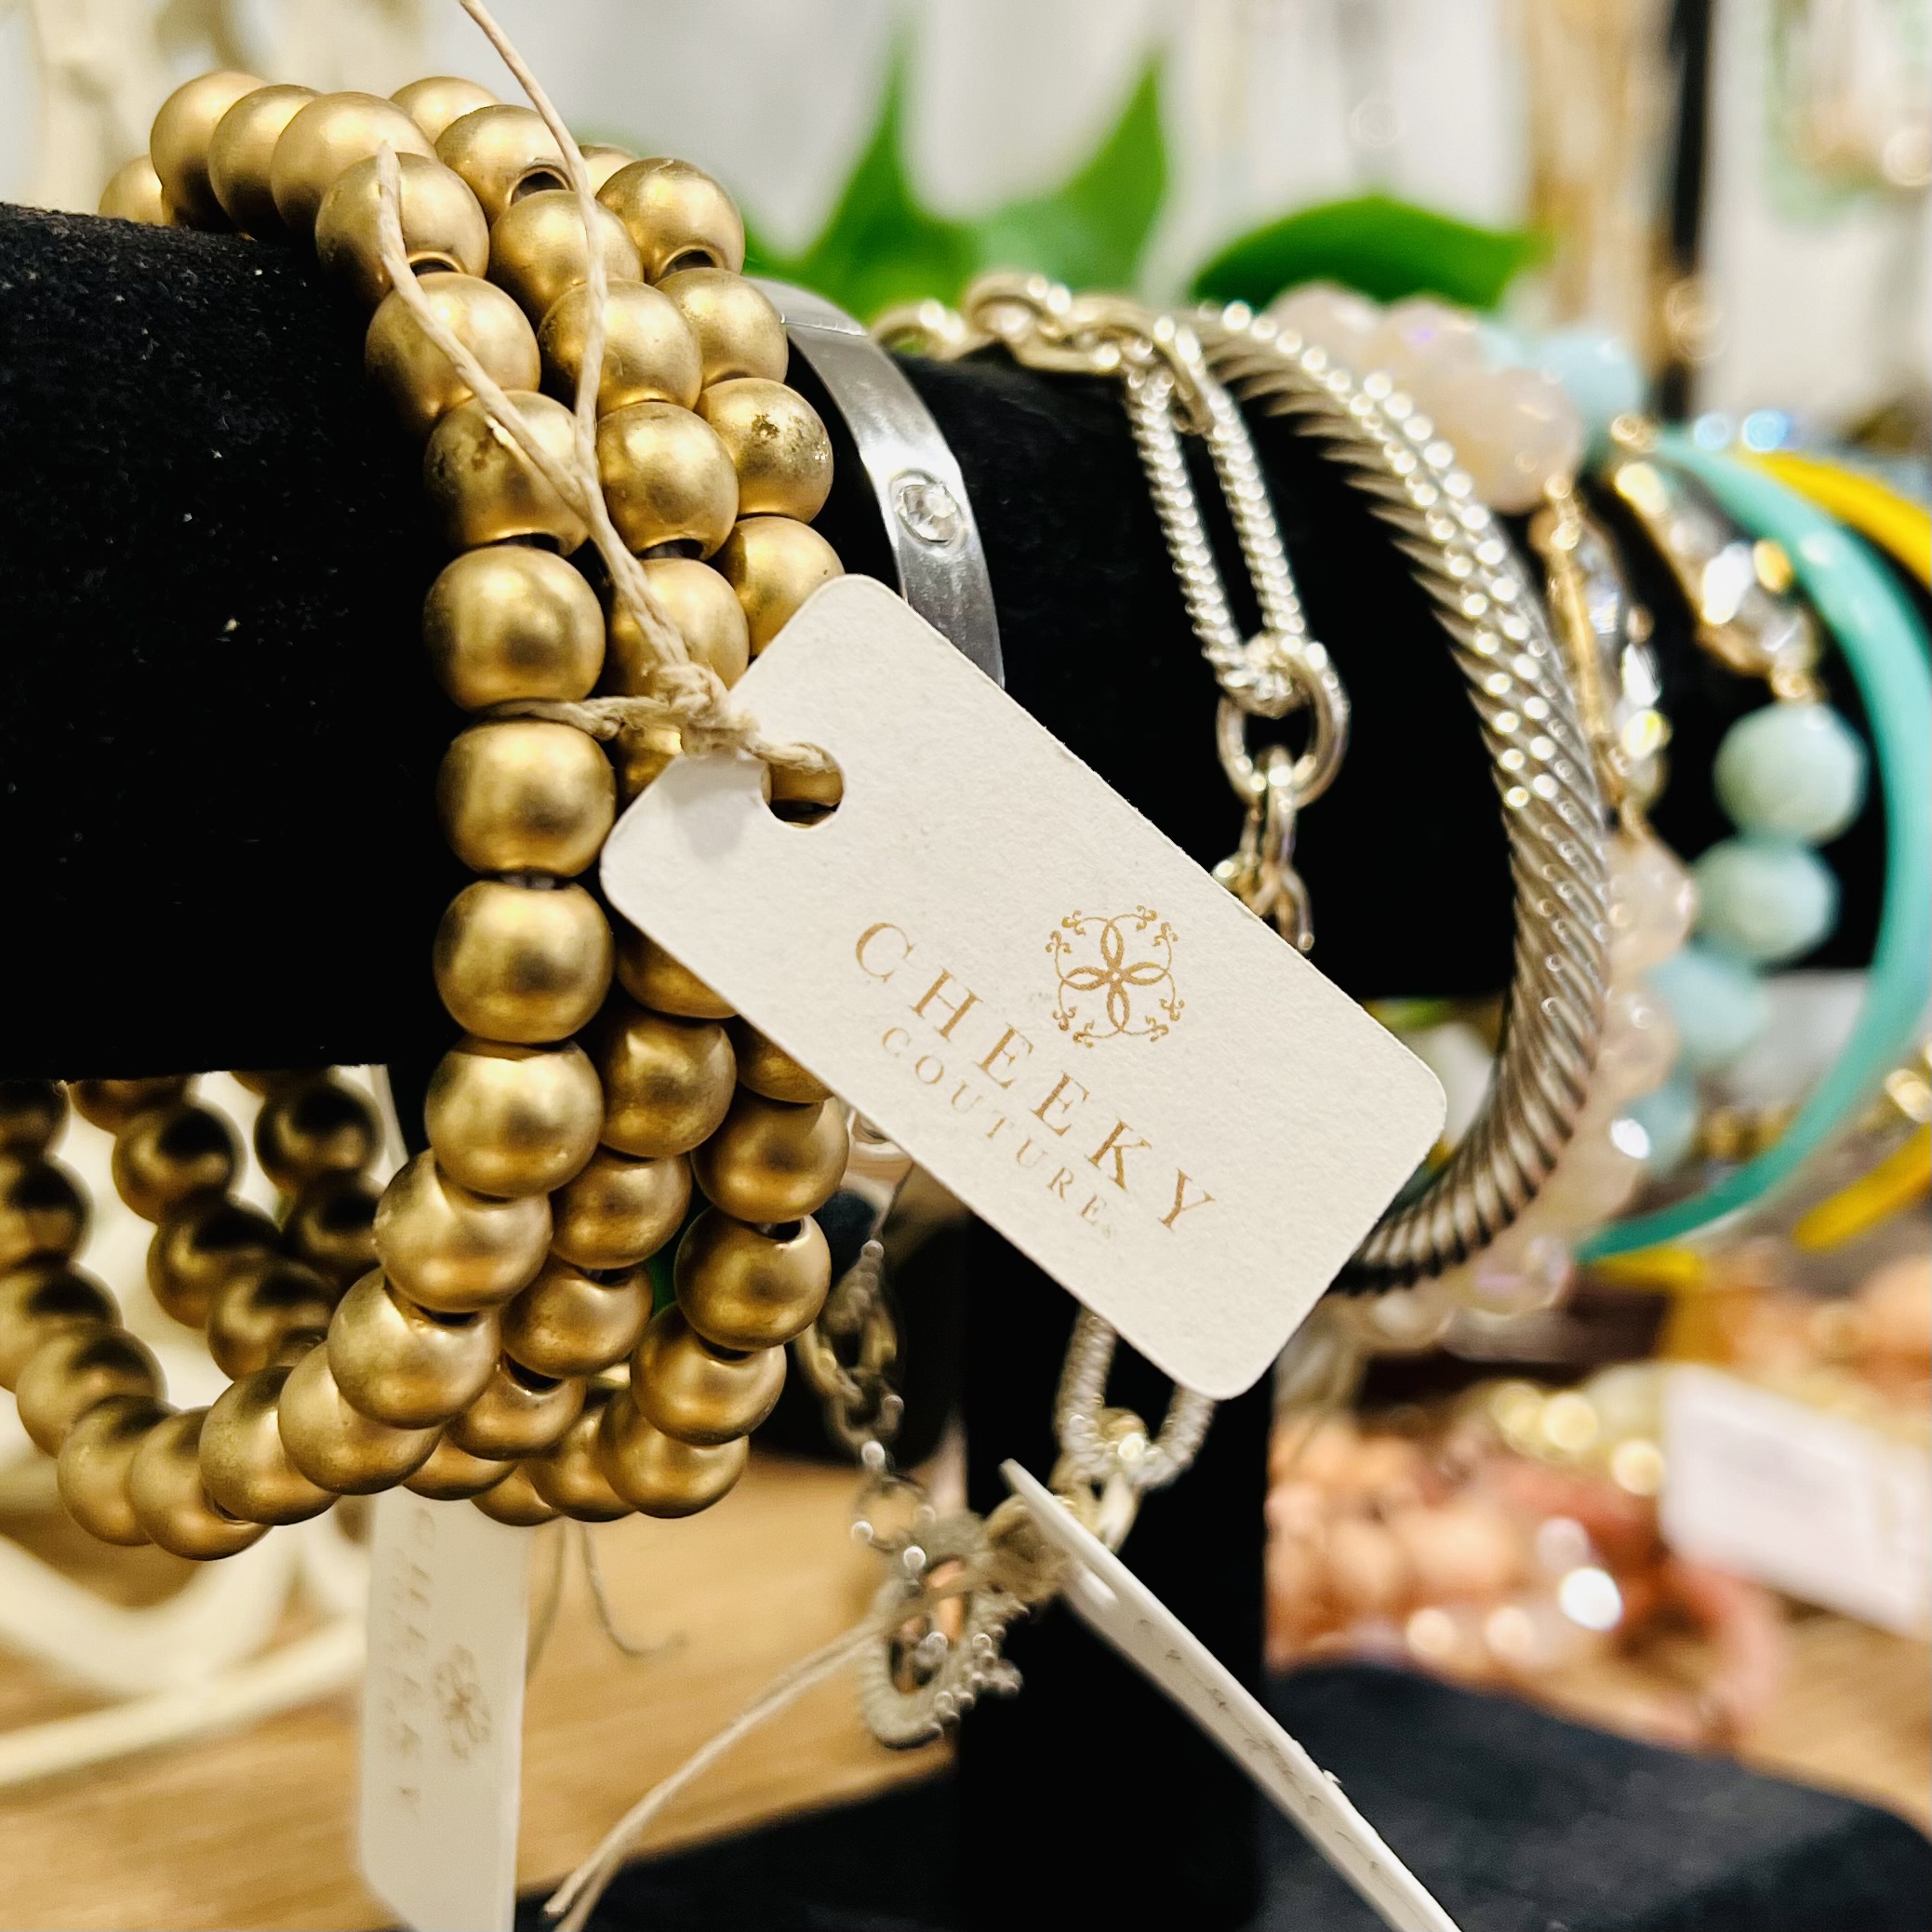 Create your friends a goody bag including a a piece of homemade jewelry from Cheeky Couture to match each of your friends’ personal styles!